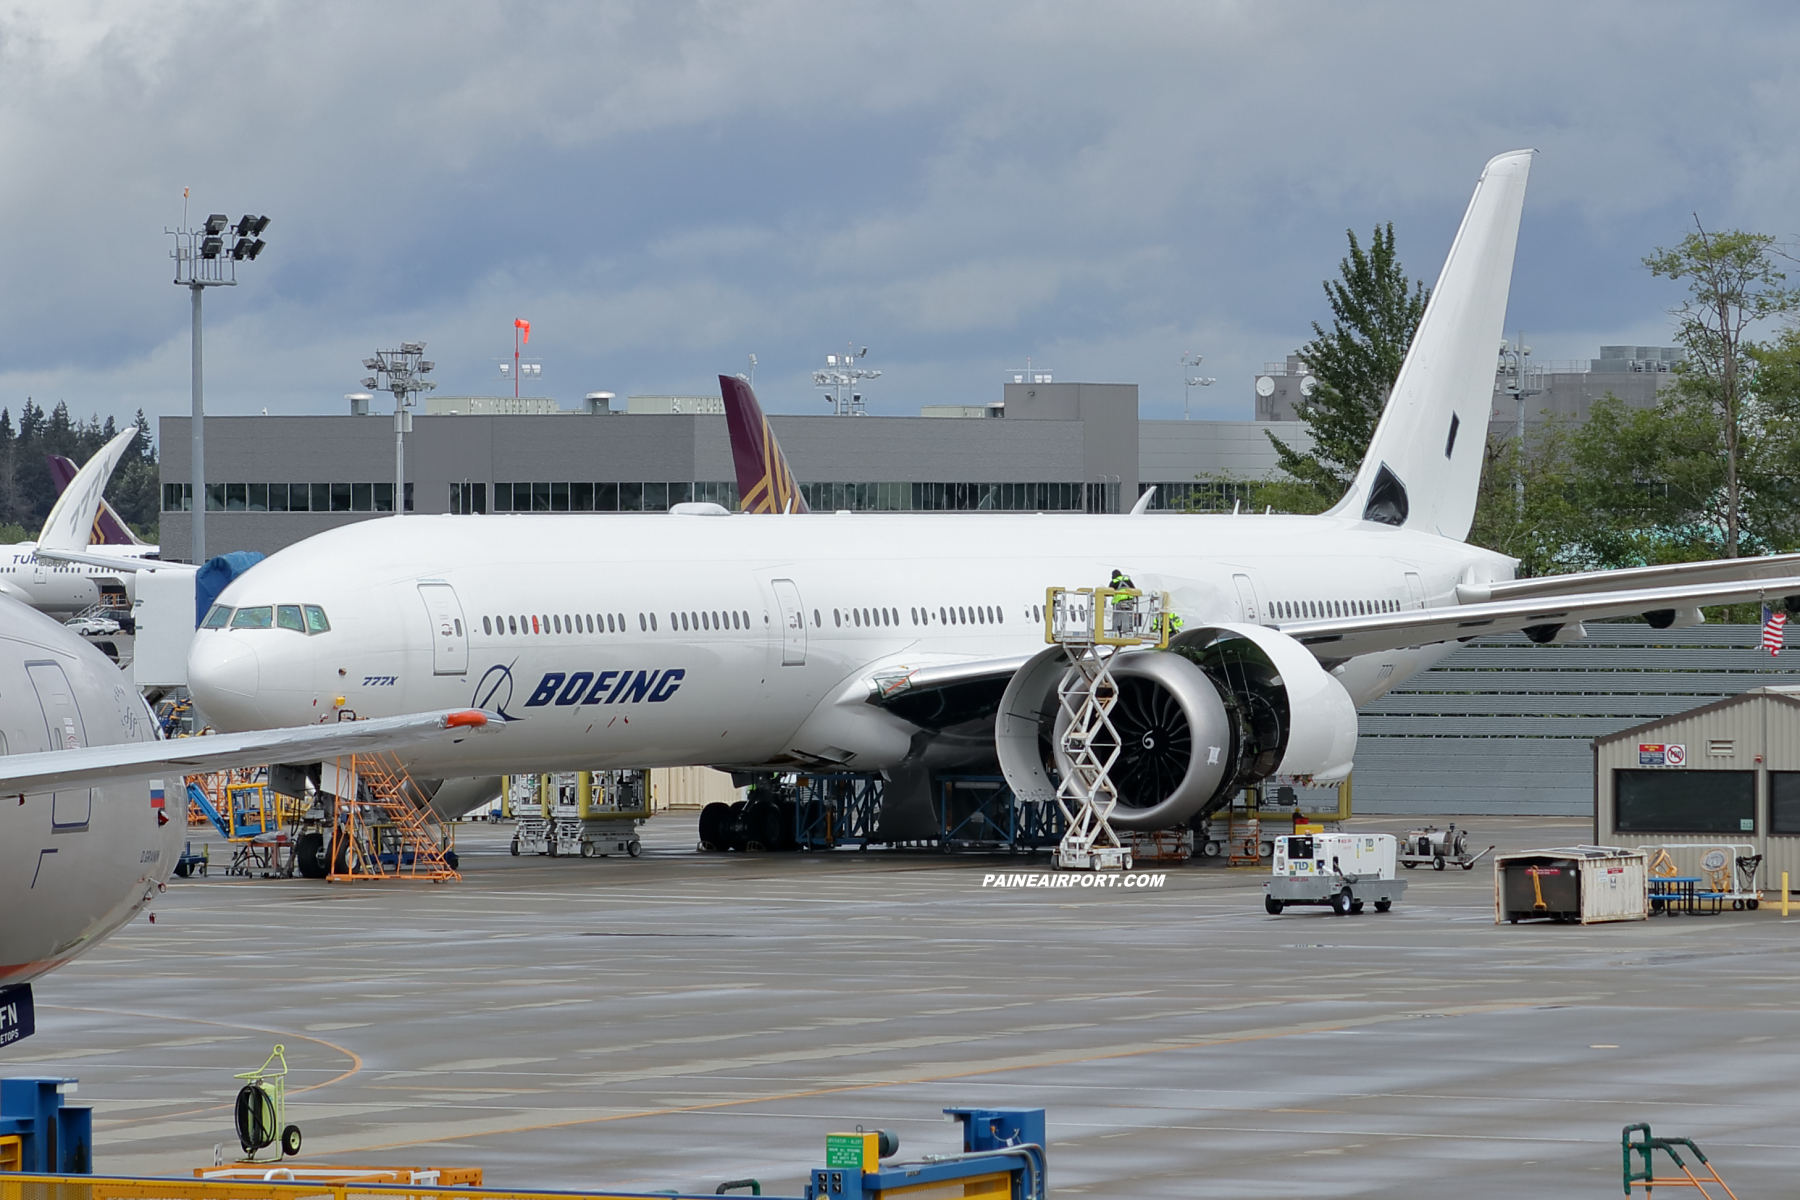 777-9 N779XY at Paine Field